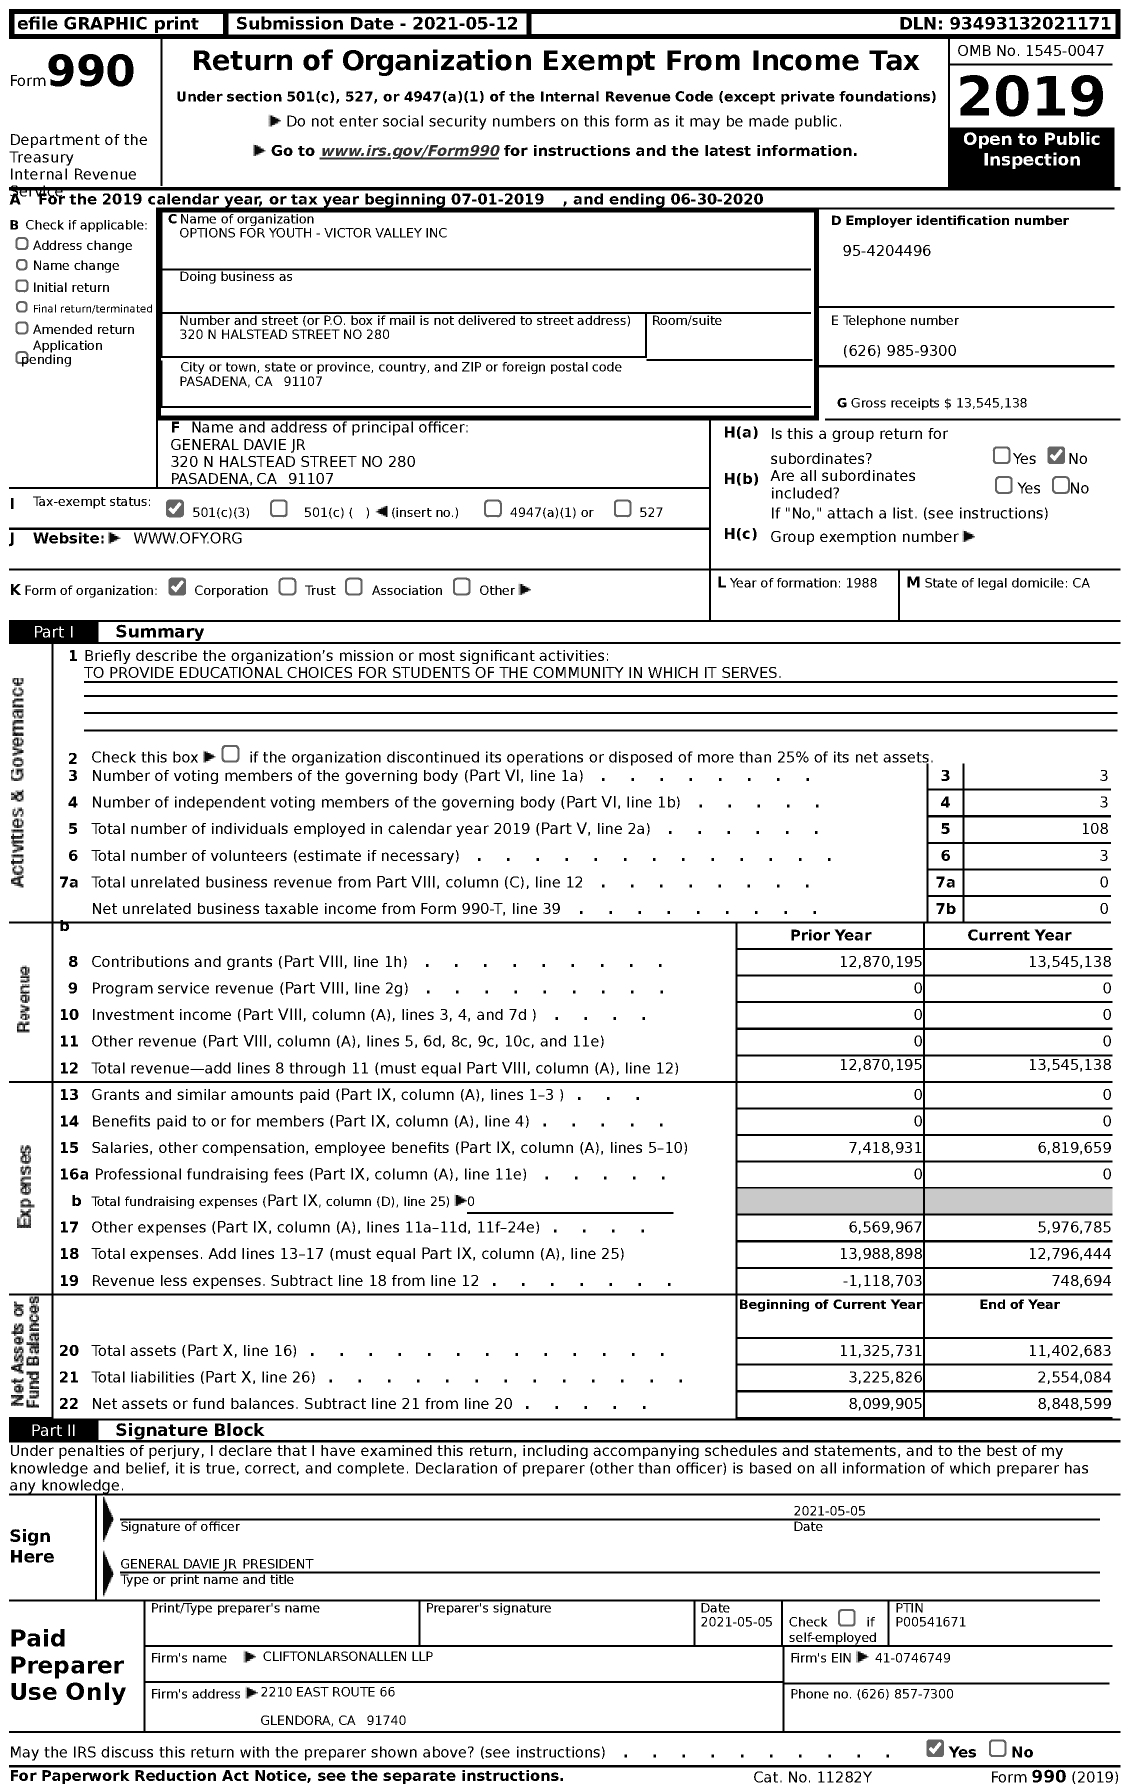 Image of first page of 2019 Form 990 for Options For YOUTH (OFY)